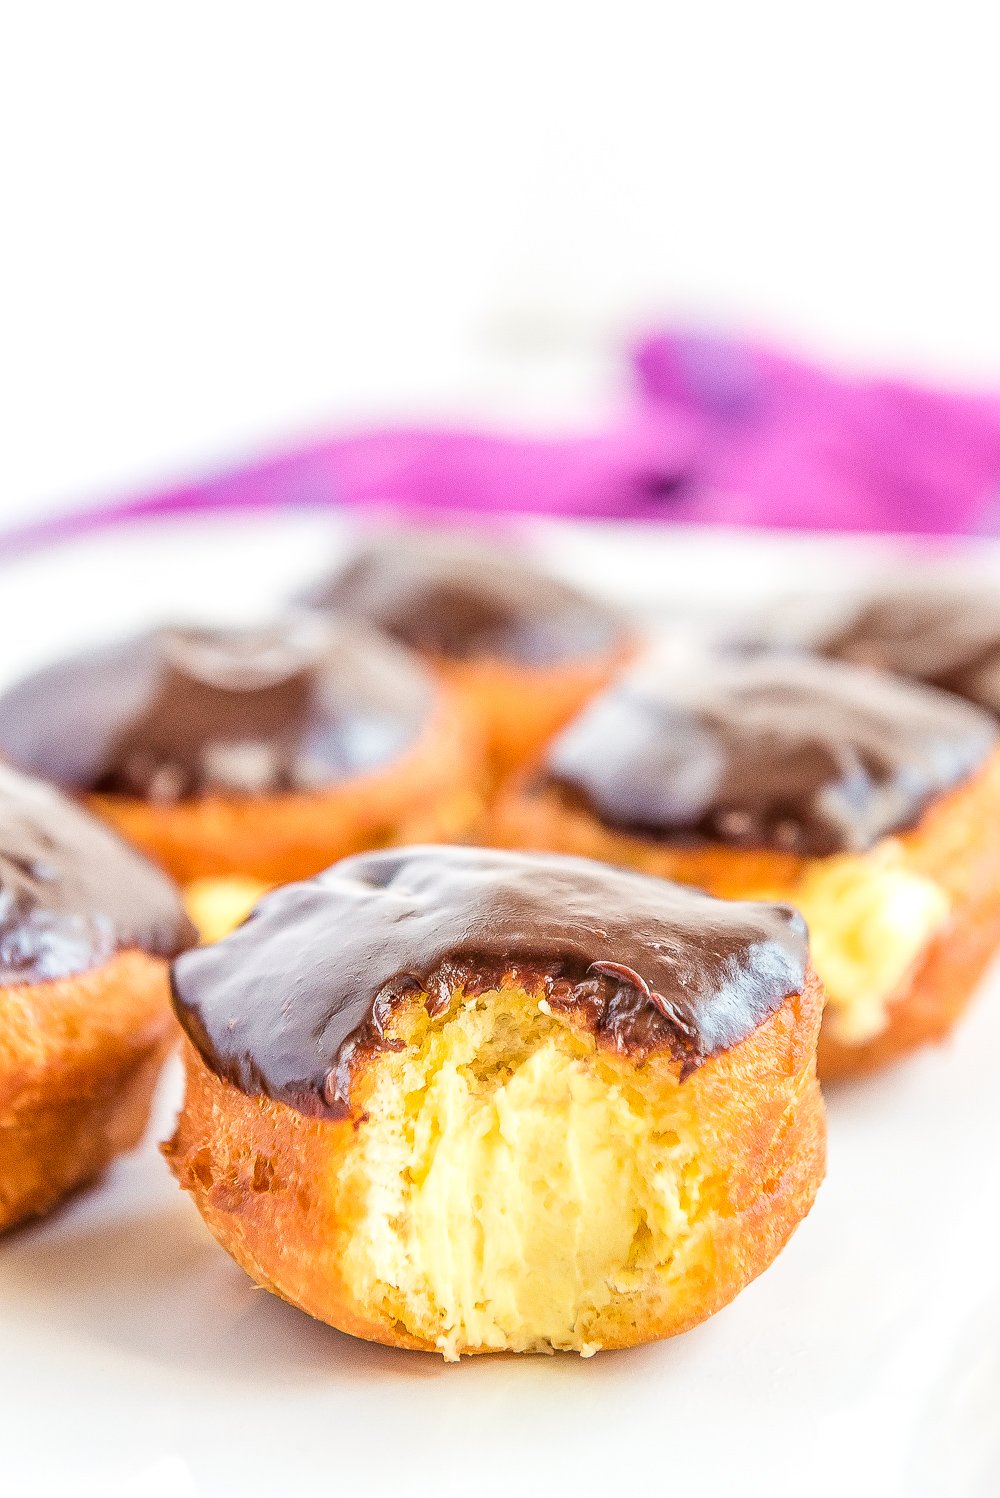 Boston Cream Donuts on a white plate. One has a bite taken out of it.